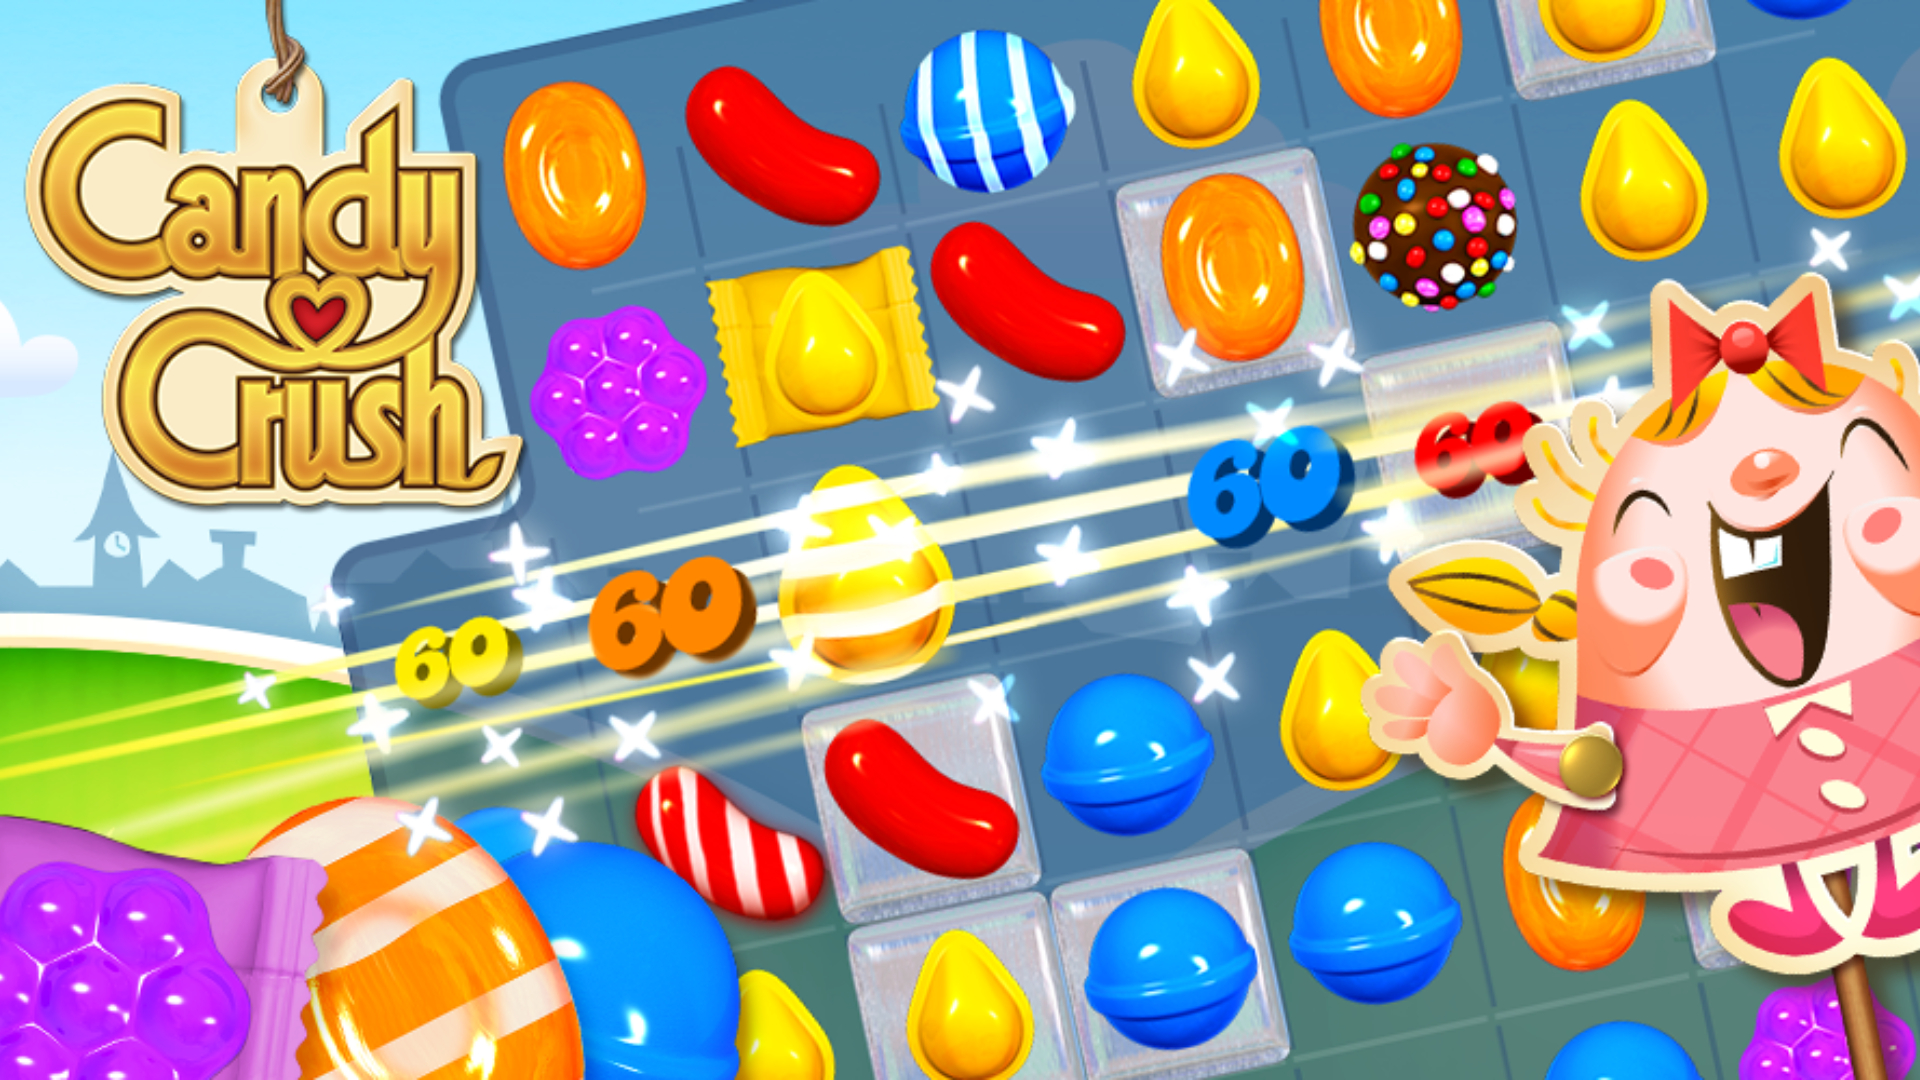 Download Candy Crush Saga for android 7.0